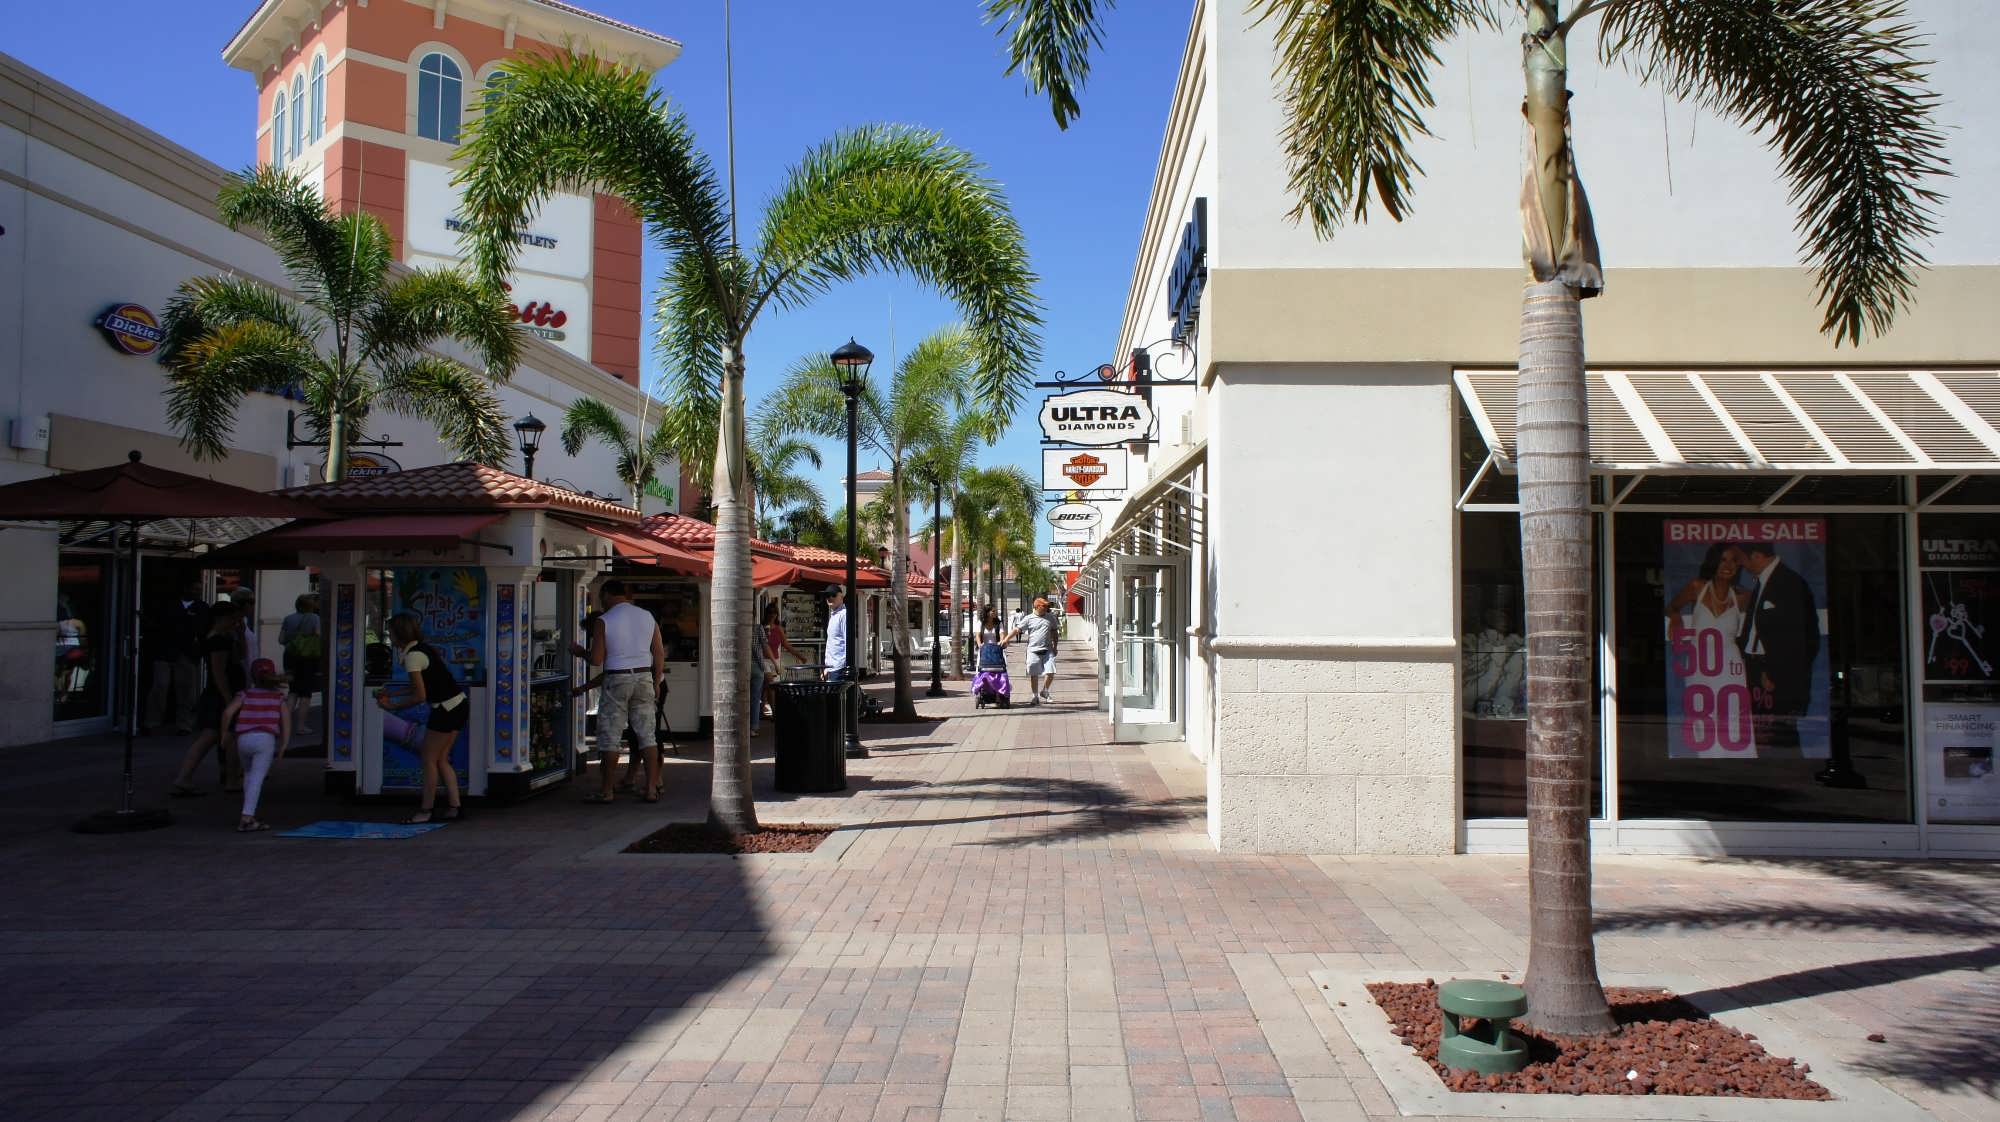 Orlando Premium Outlets International Drive: Closest outlets to Universal Orlando